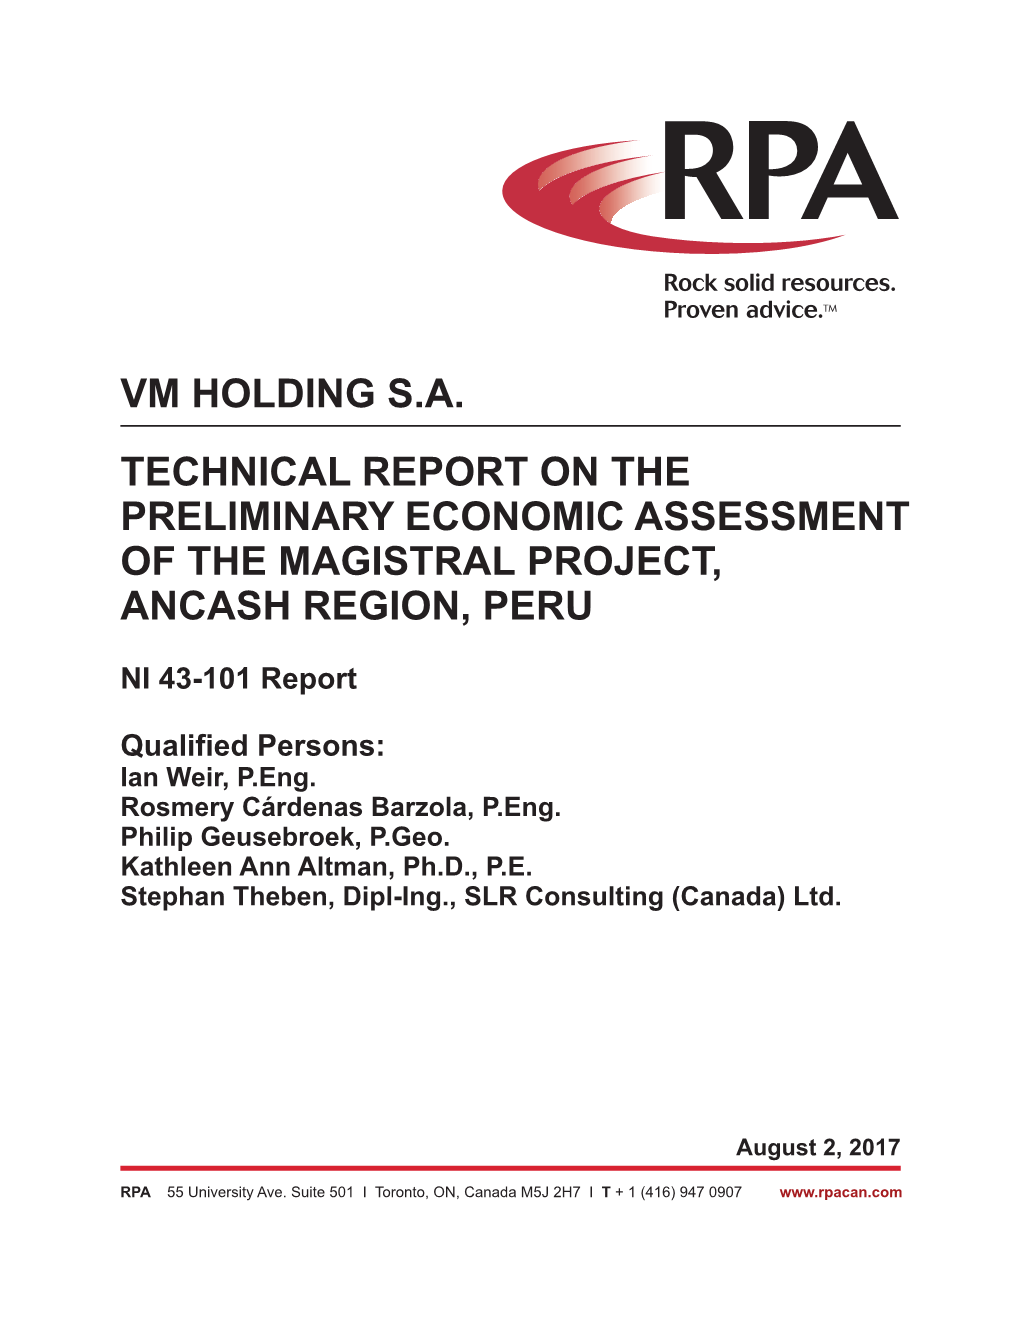 Vm Holding S.A. Technical Report on the Preliminary Economic Assessment of the Magistral Project, Ancash Region, Peru